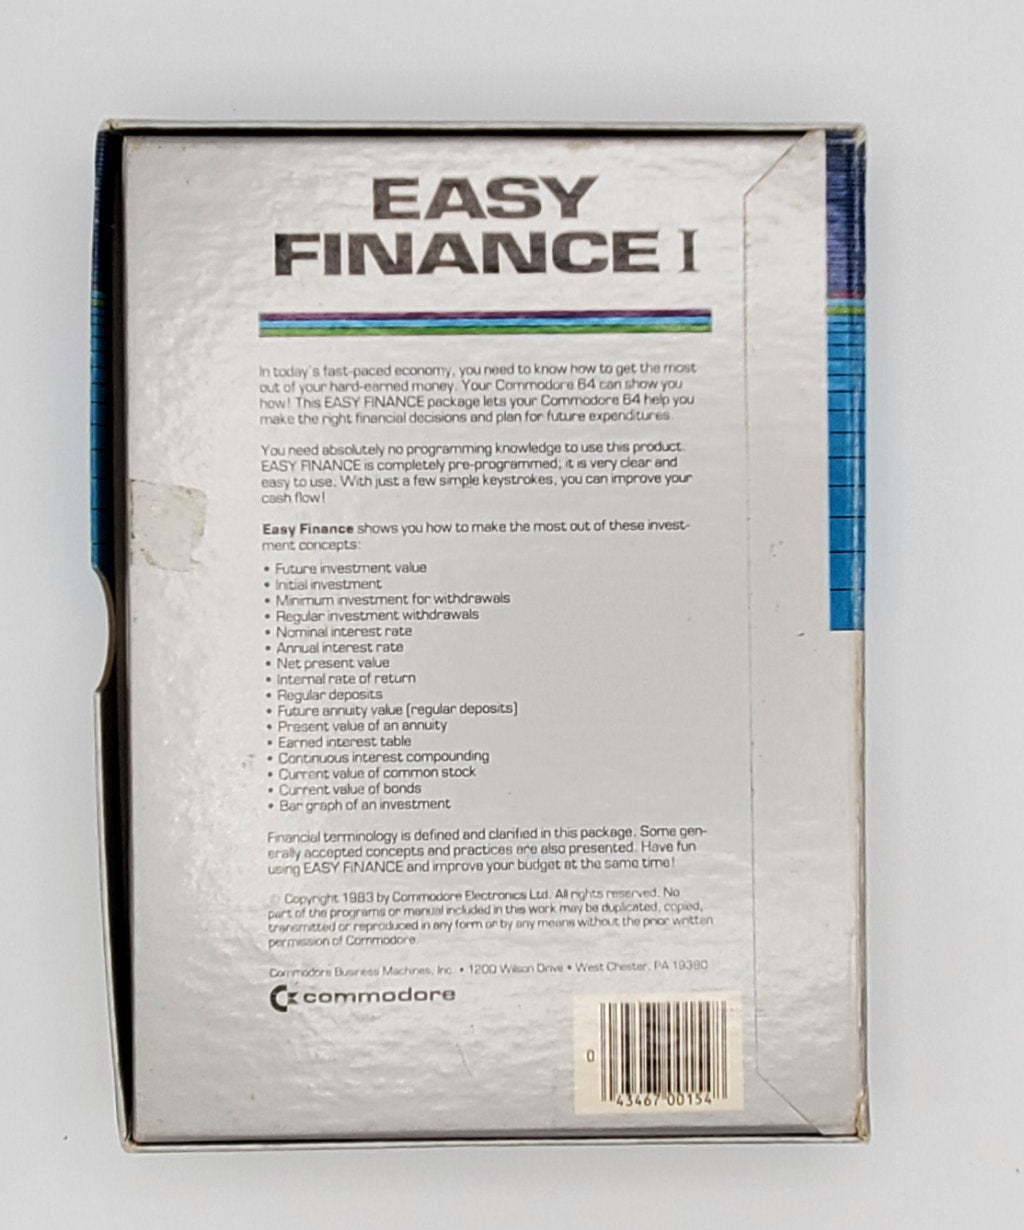 Easy Finance I - by Commodore